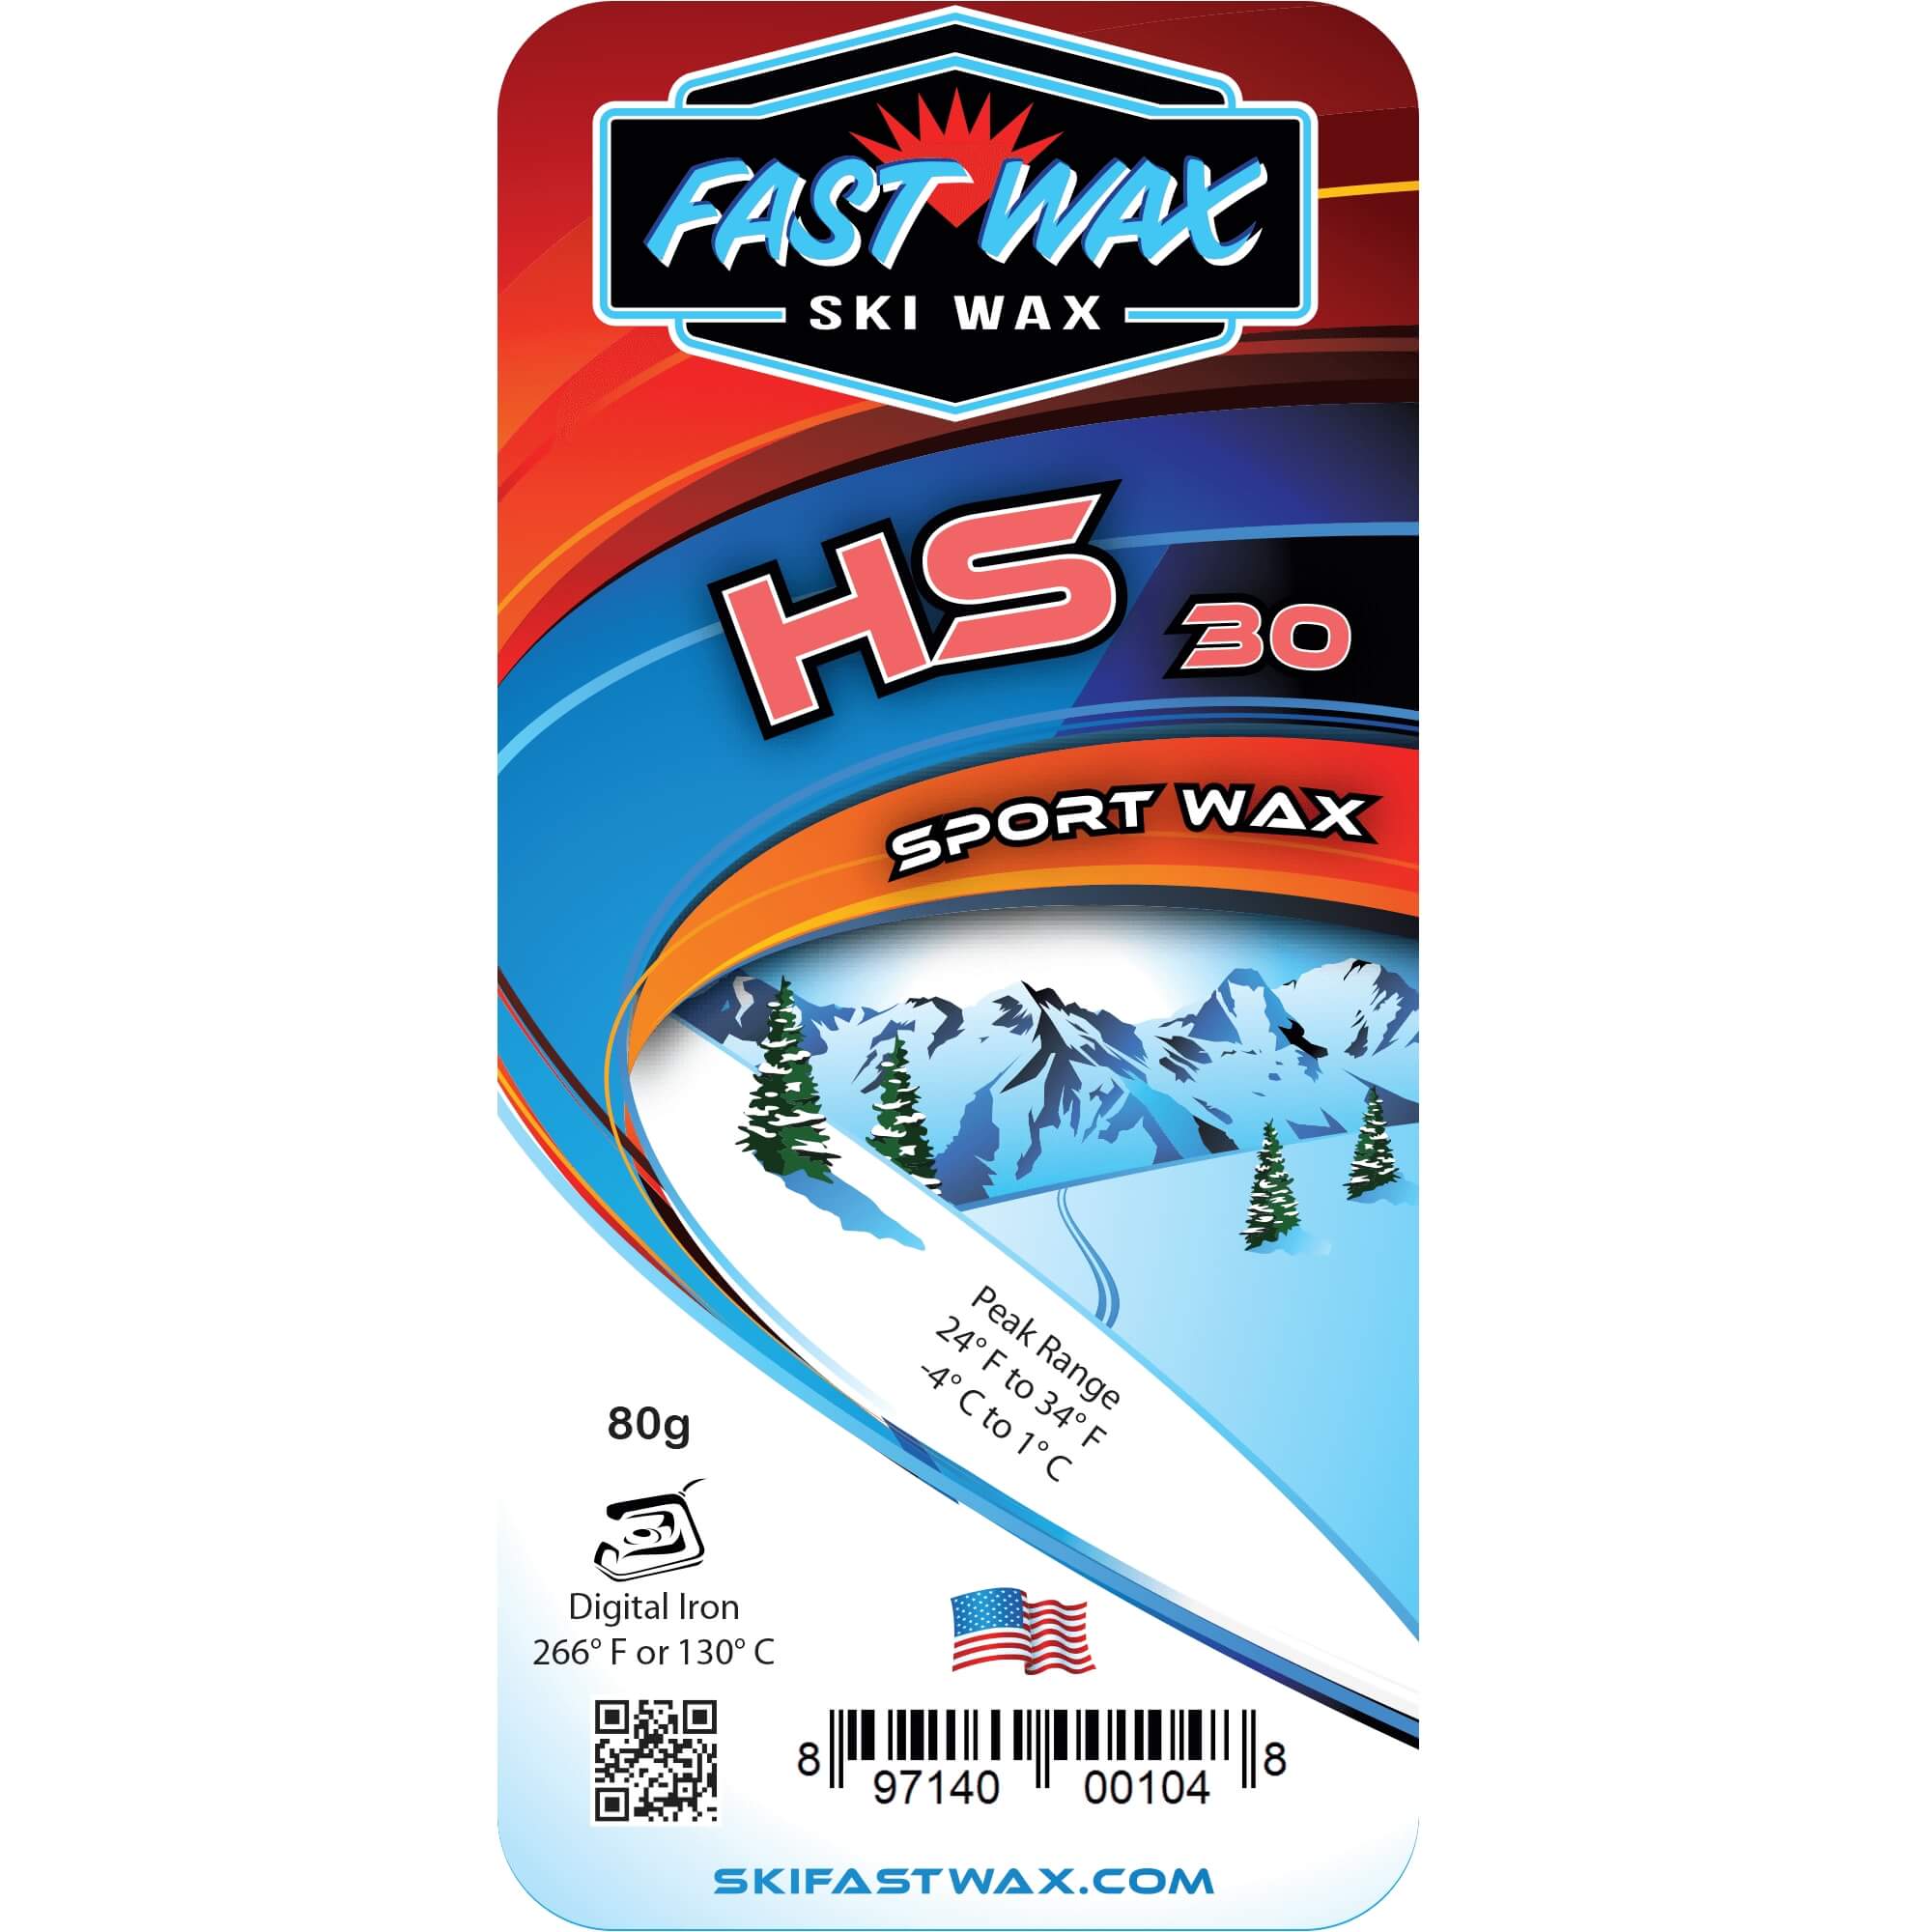 Paraffin ski wax for skiing or boarding, fast and durable